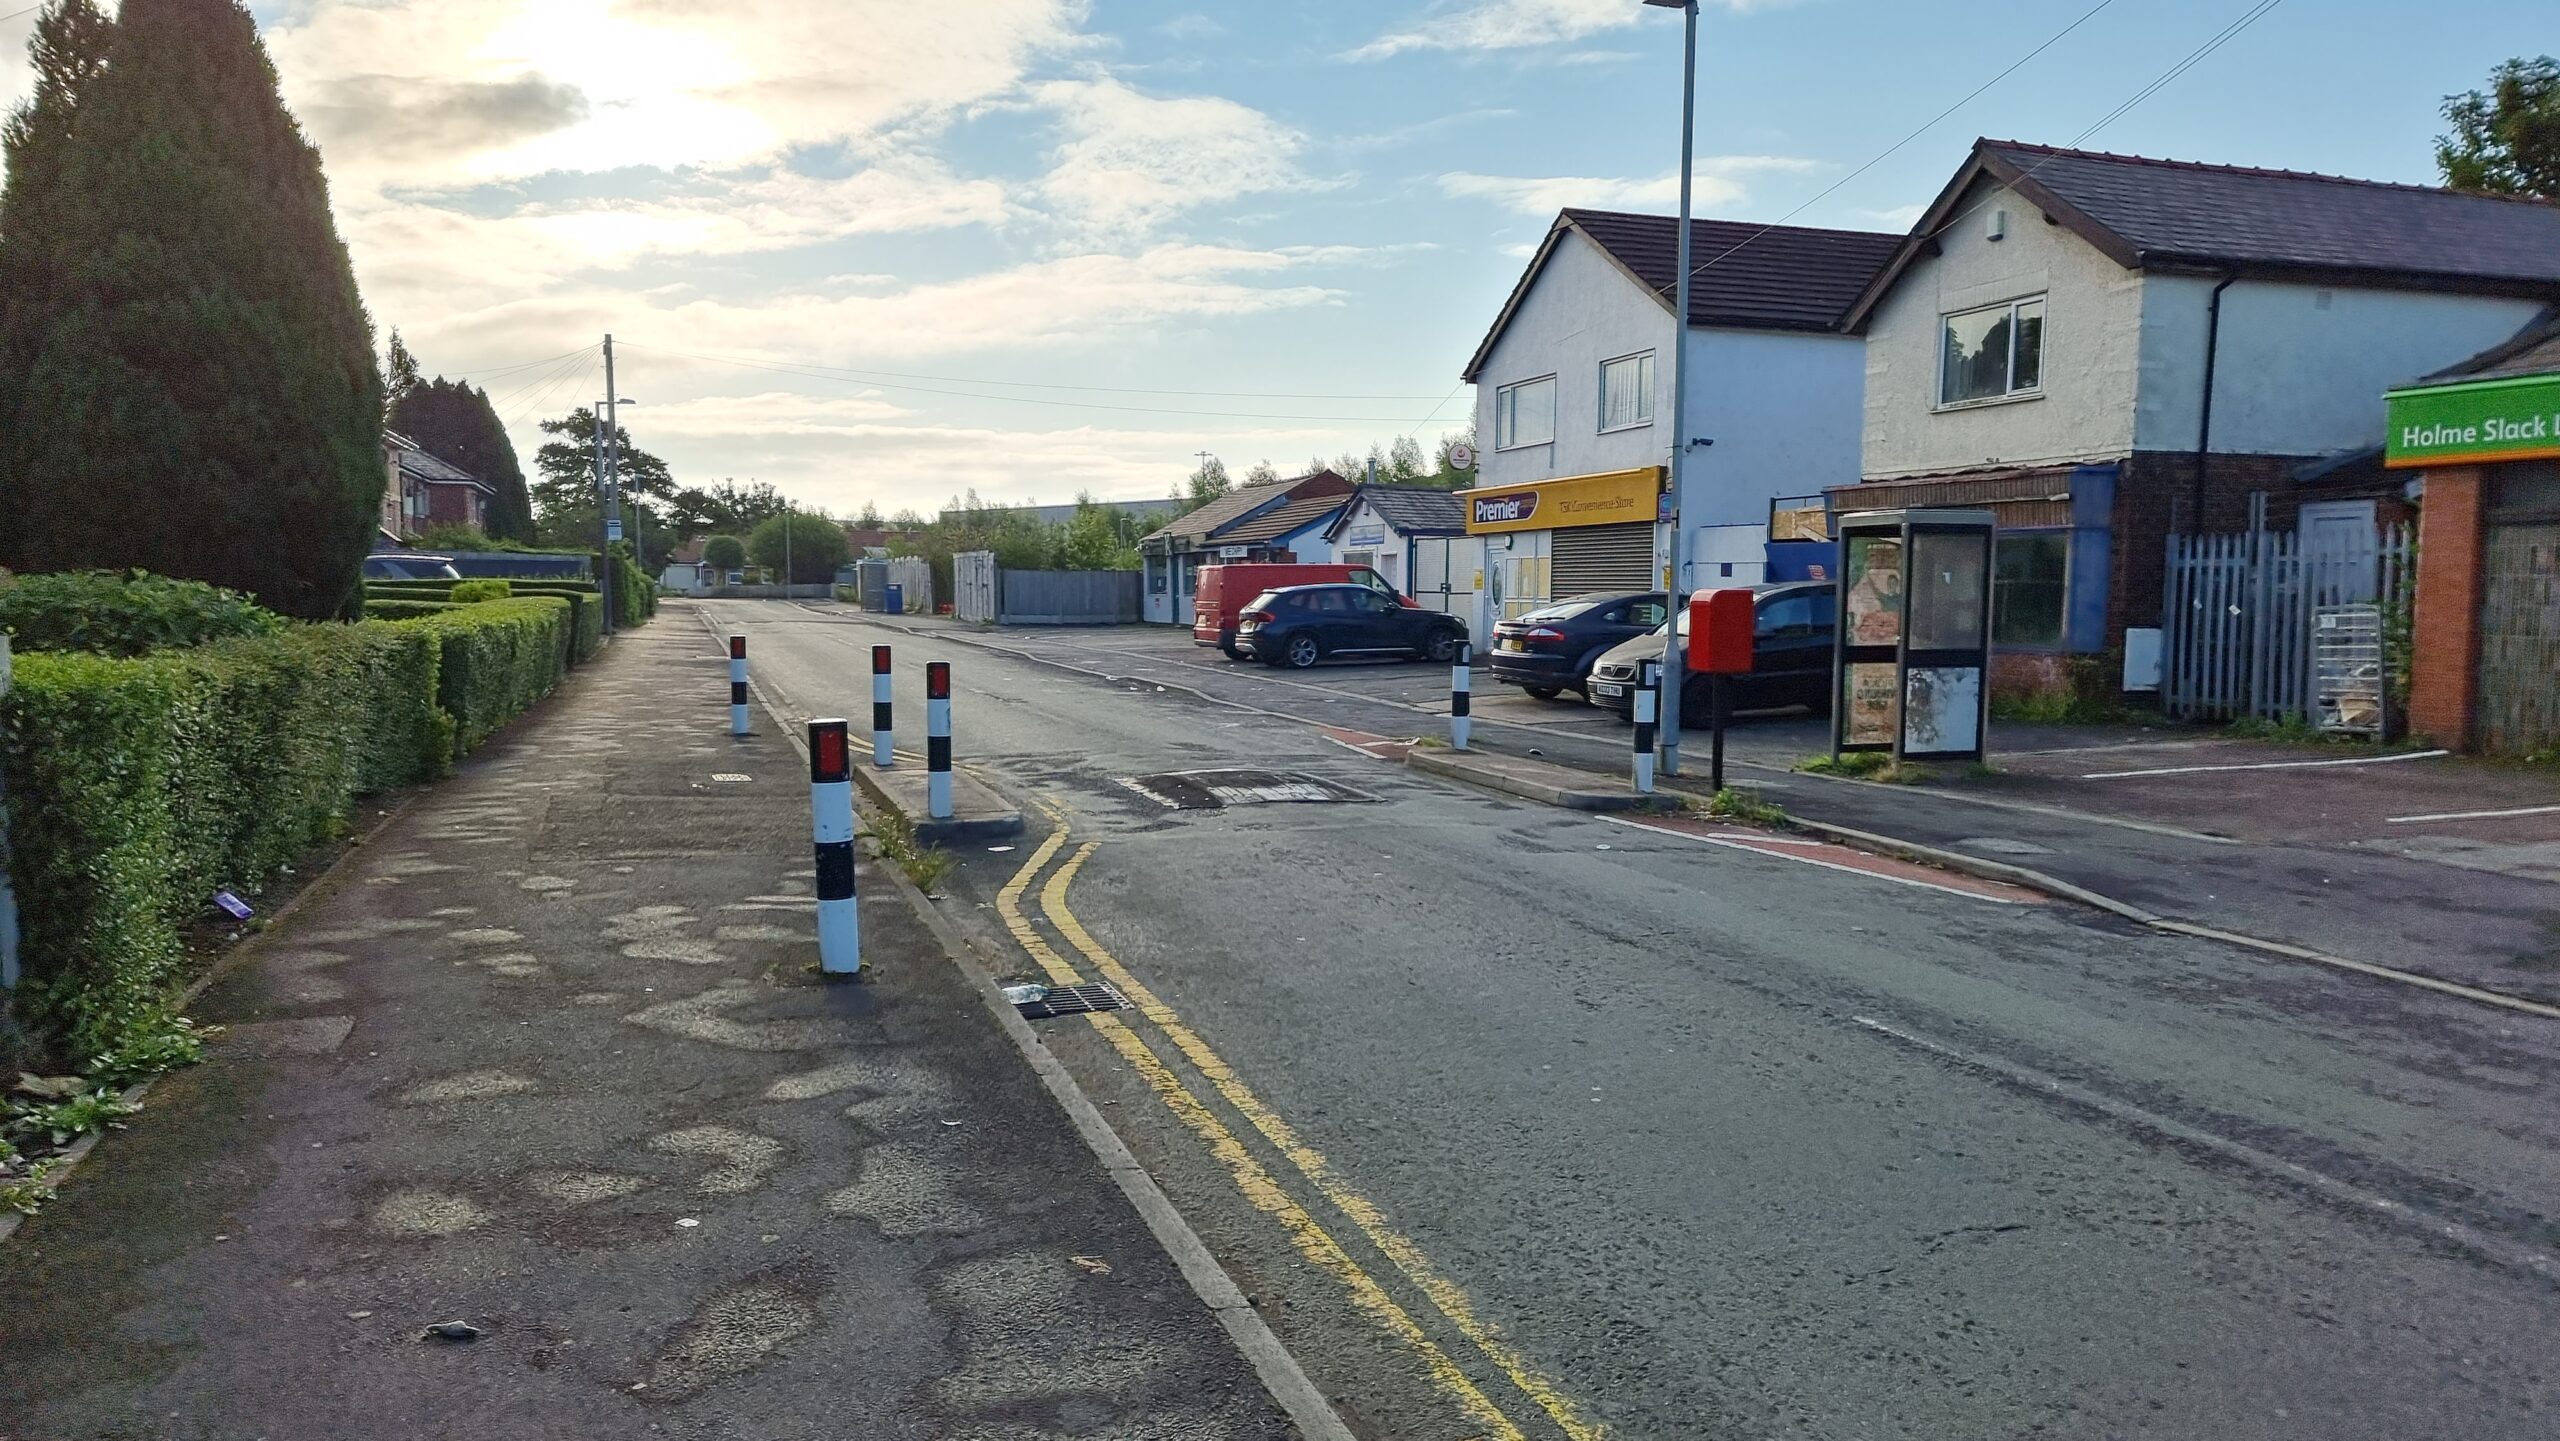 Photograph showing a suburban street in a Northern town, shortly after sunrise. The belittered street is worn and the decrepit husk of a telephone box stands outside an abandoned store front.